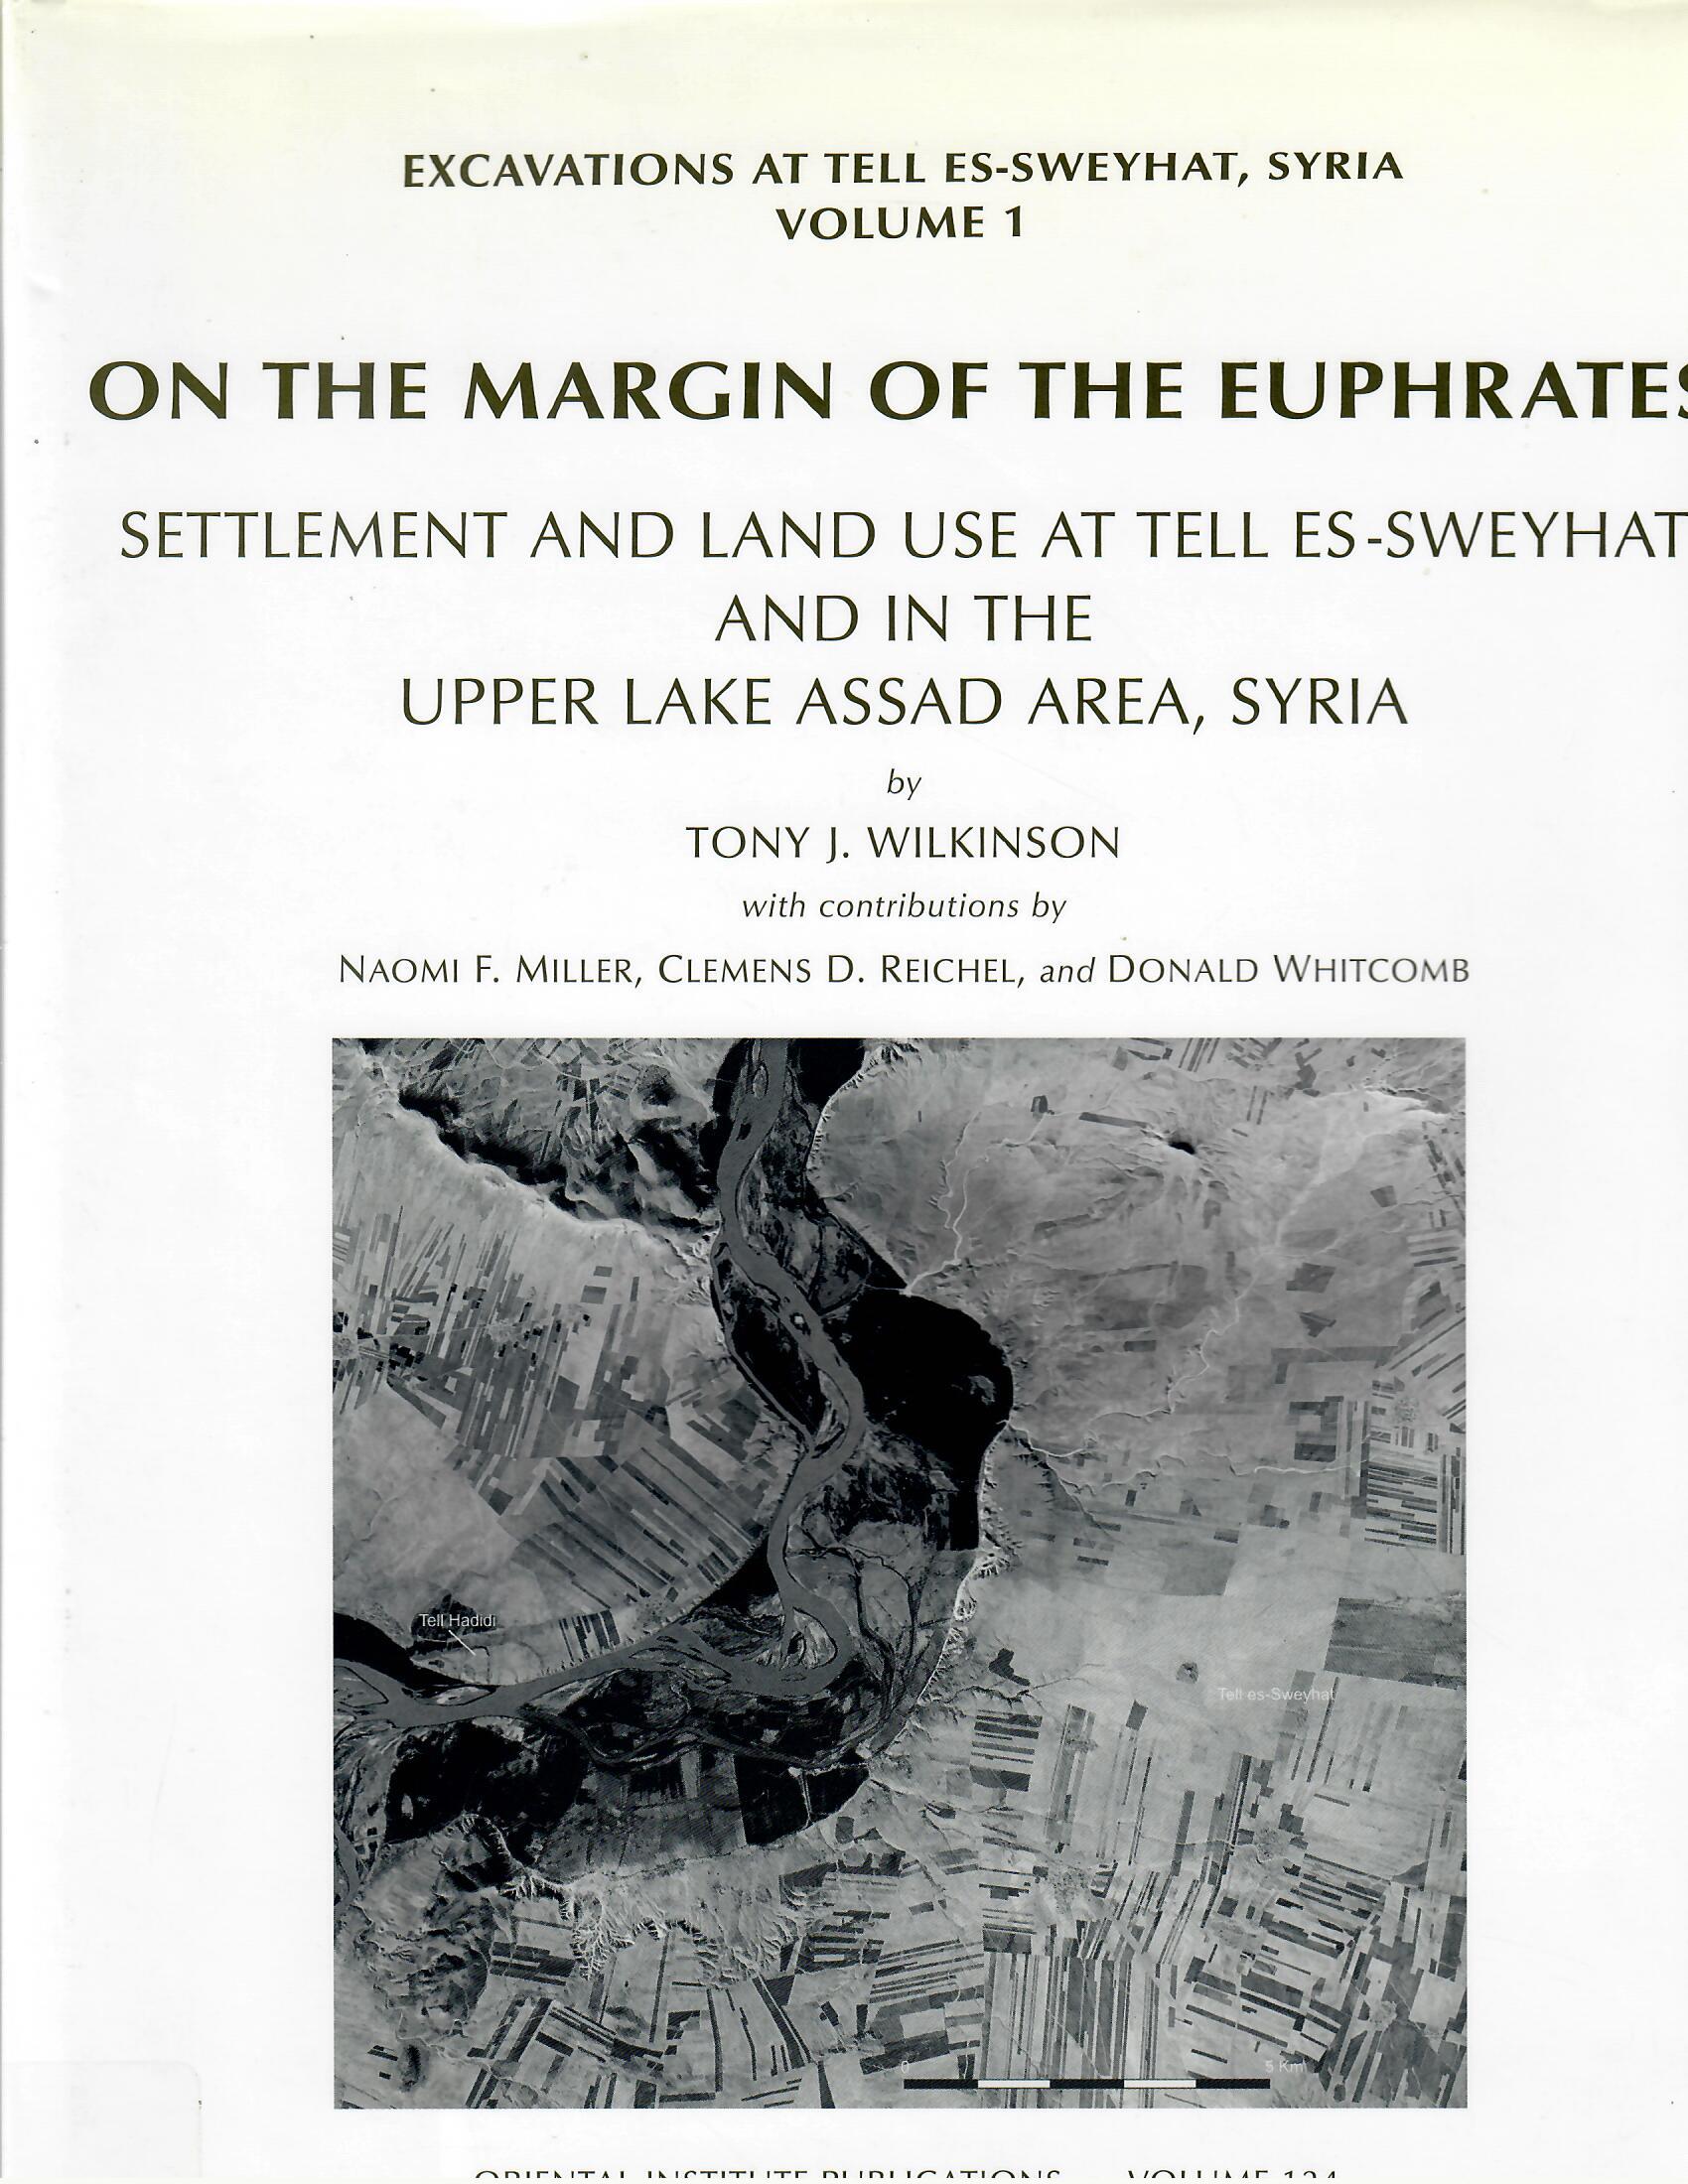 ON THE MARGIN OF THE EUPHRATES EXCAVATIONS AT TELL ES SWEYHAT, SYRIA VOLUME 1